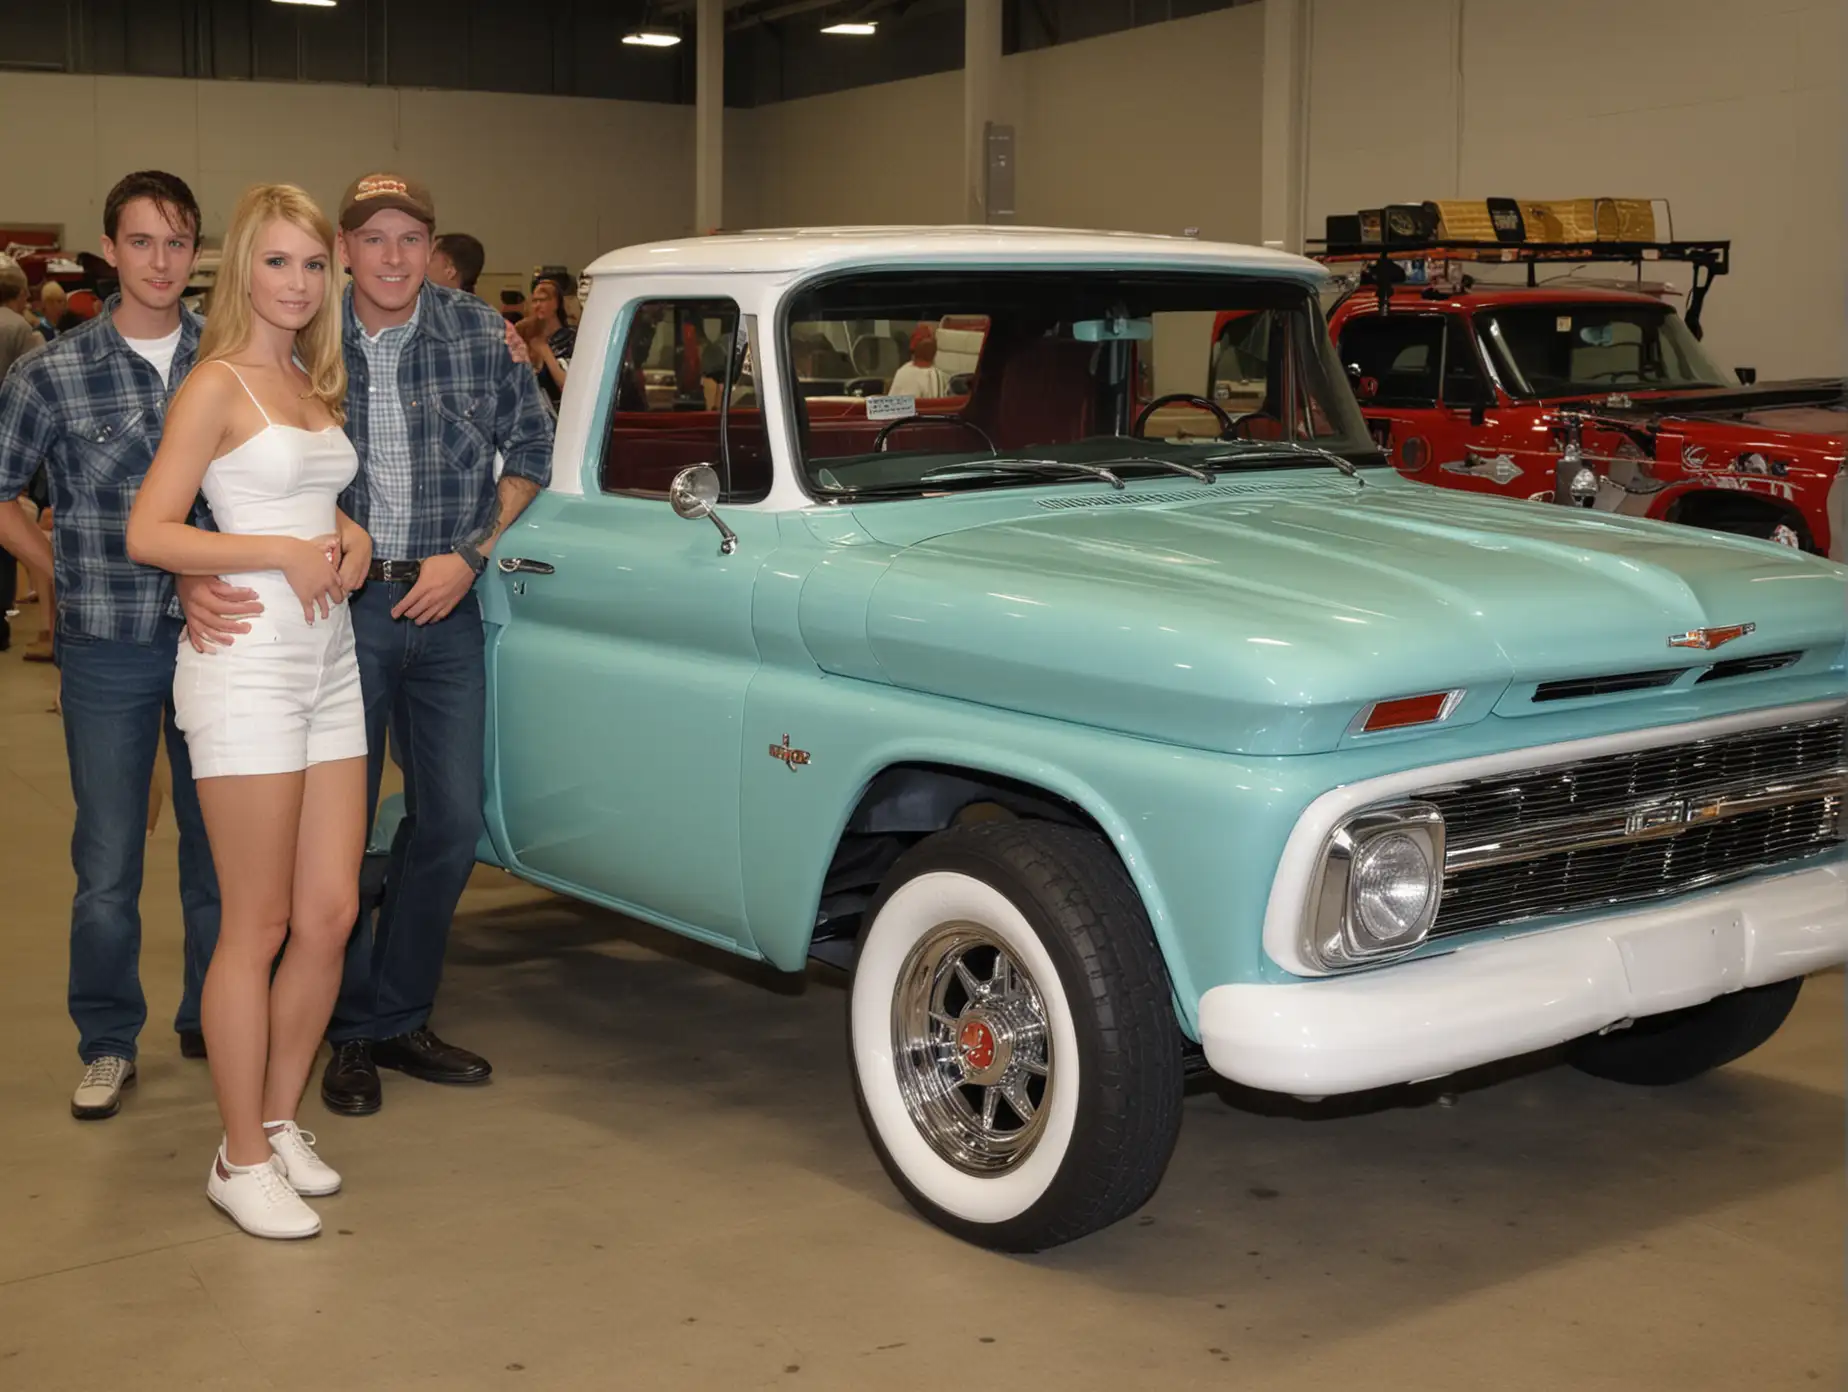 indoor collectors car  show 1964 chevrolet c10 pickup ,28 year old couple standing by truck